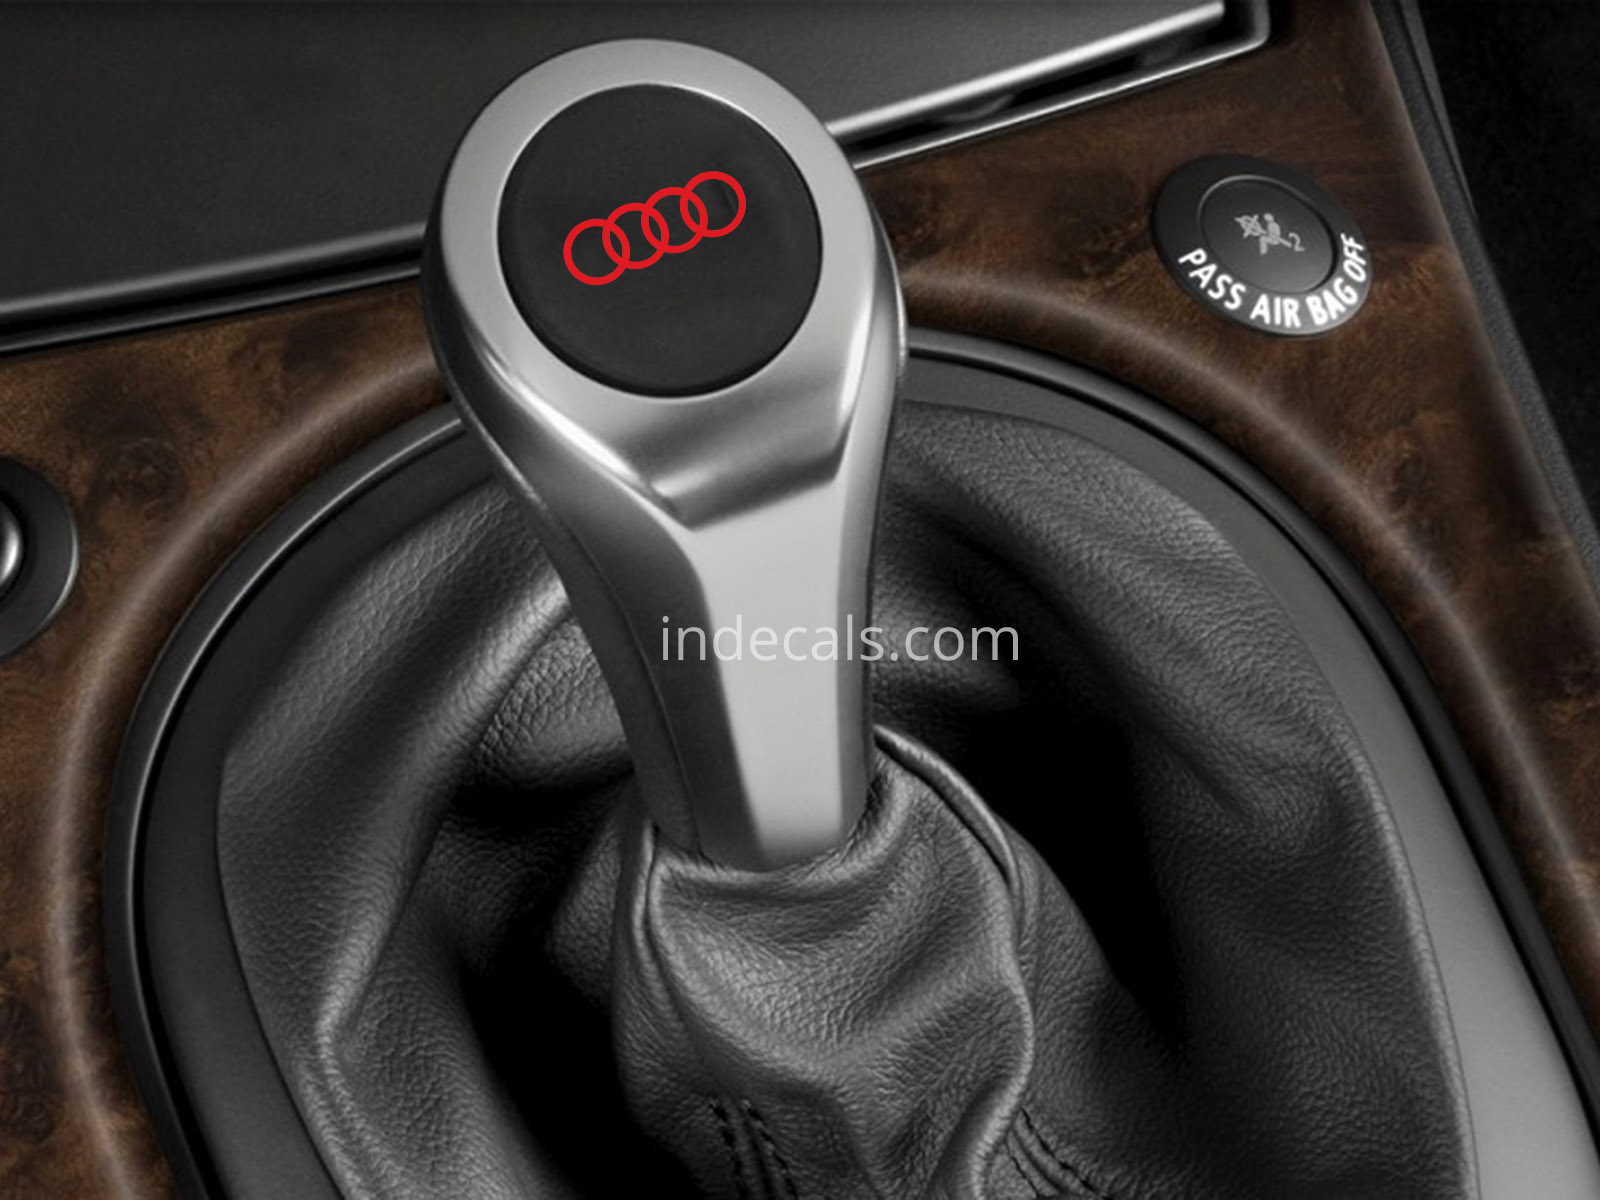 3 x Audi Rings Stickers for Gear Knob - Red